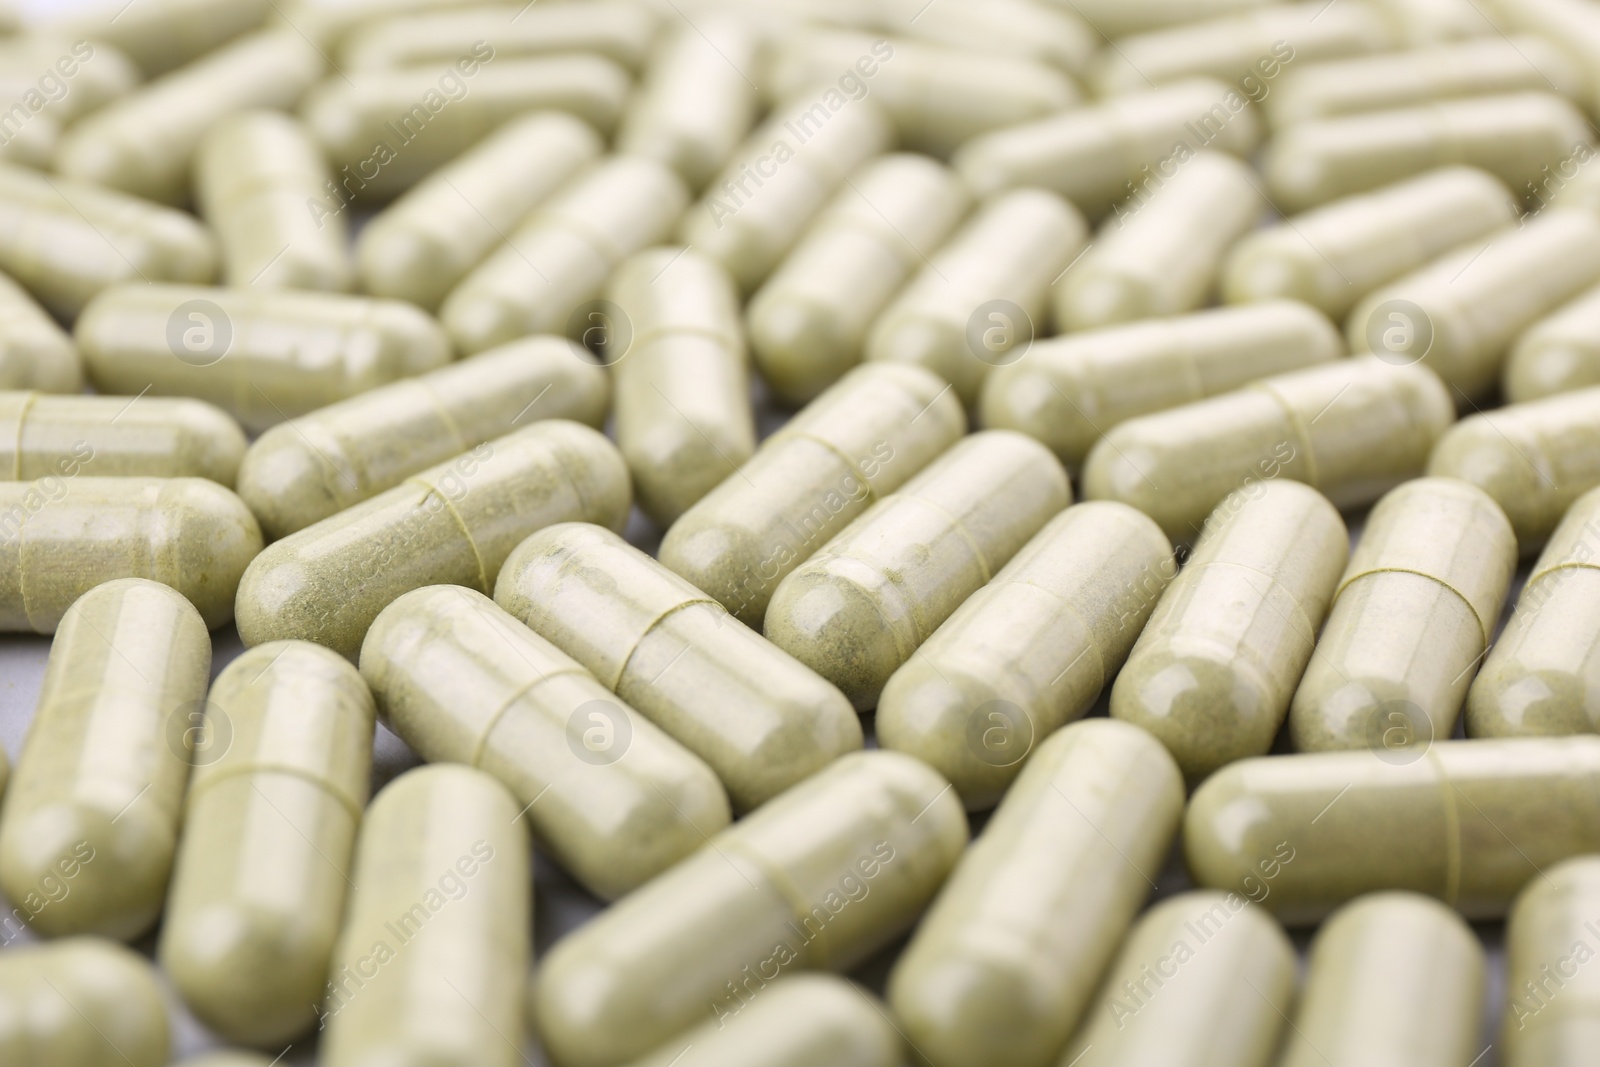 Photo of Many vitamin capsules as background, closeup view